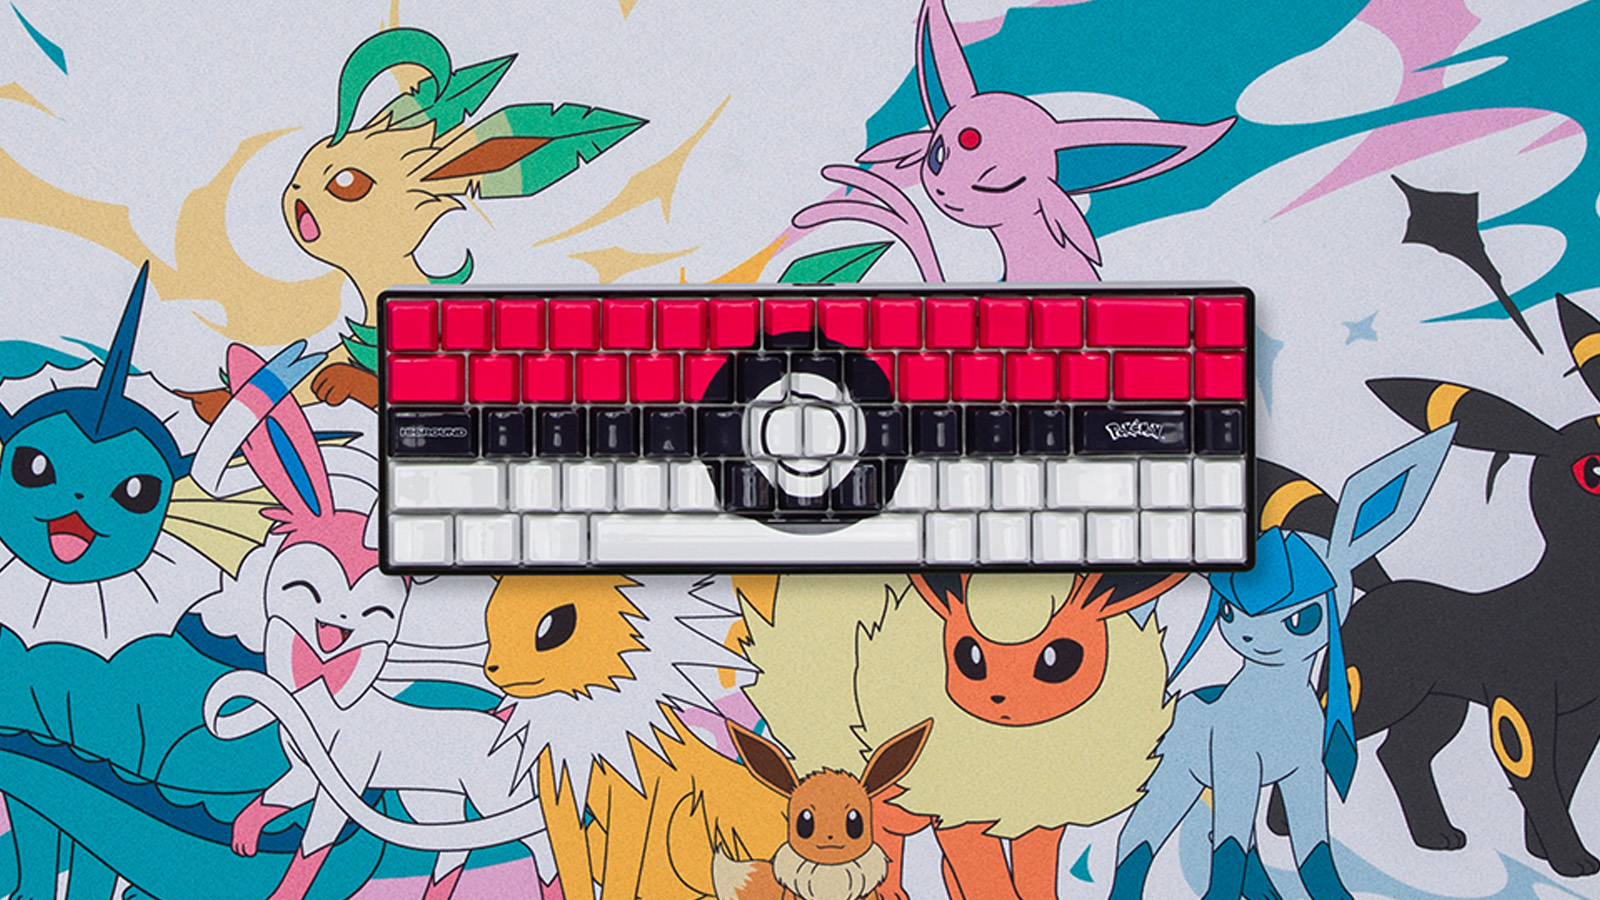 Higround captures them all with its amazing Pokemon Keyboard